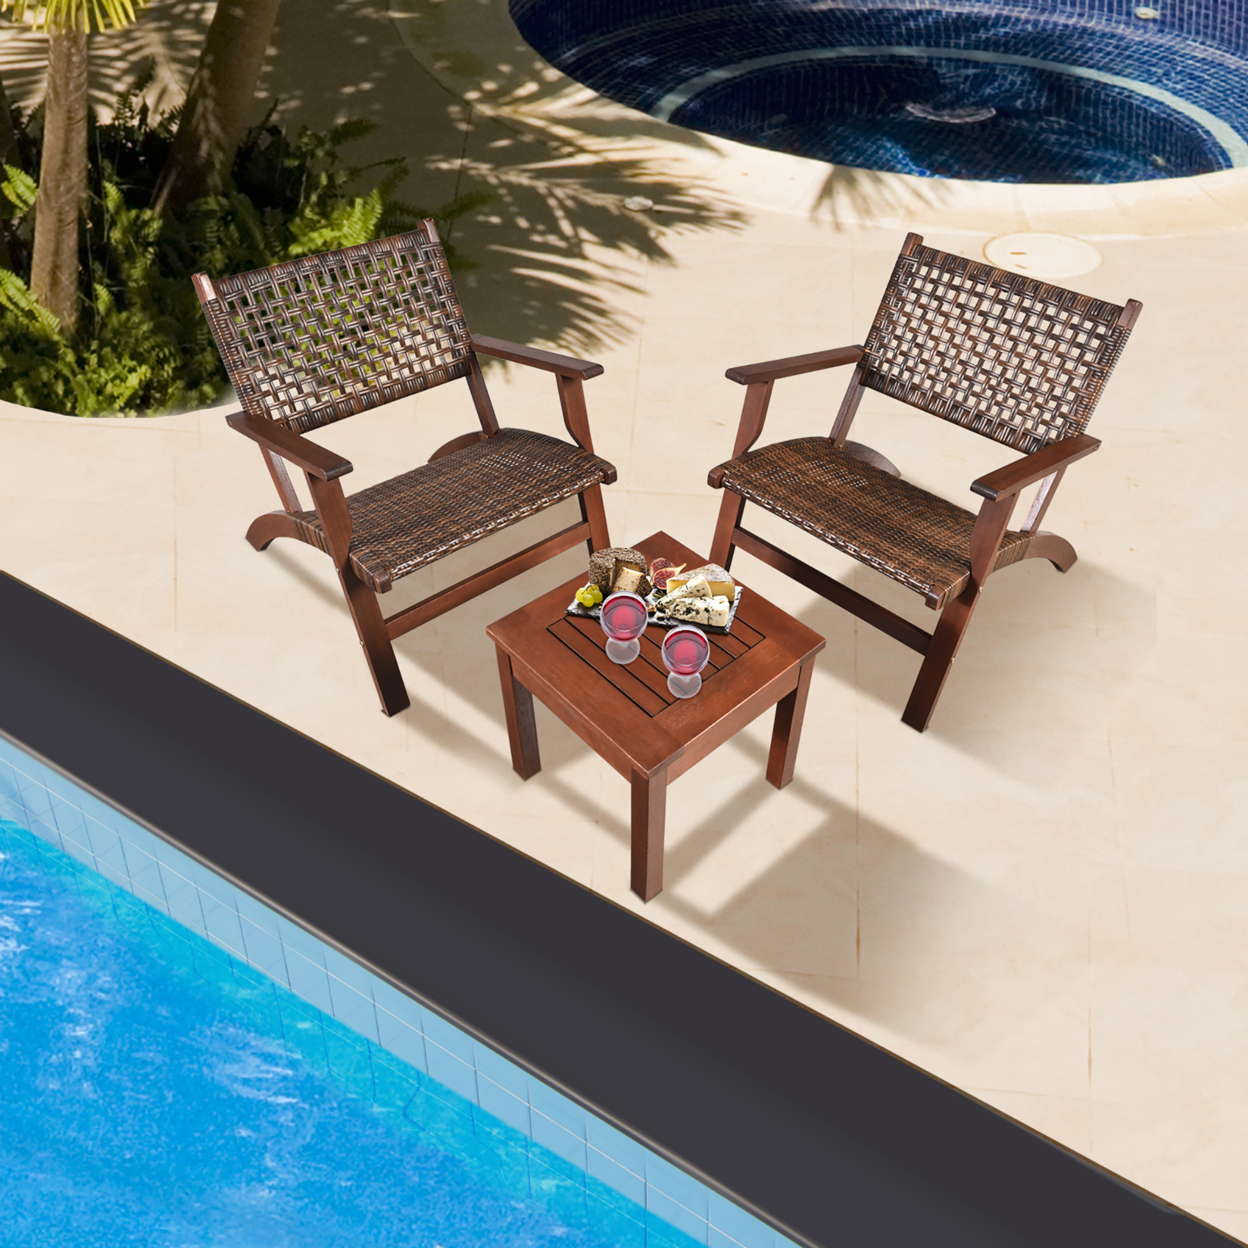 3PCS Rattan Patio Chair & Table Set Outdoor Furniture Set W/ Wooden Frame